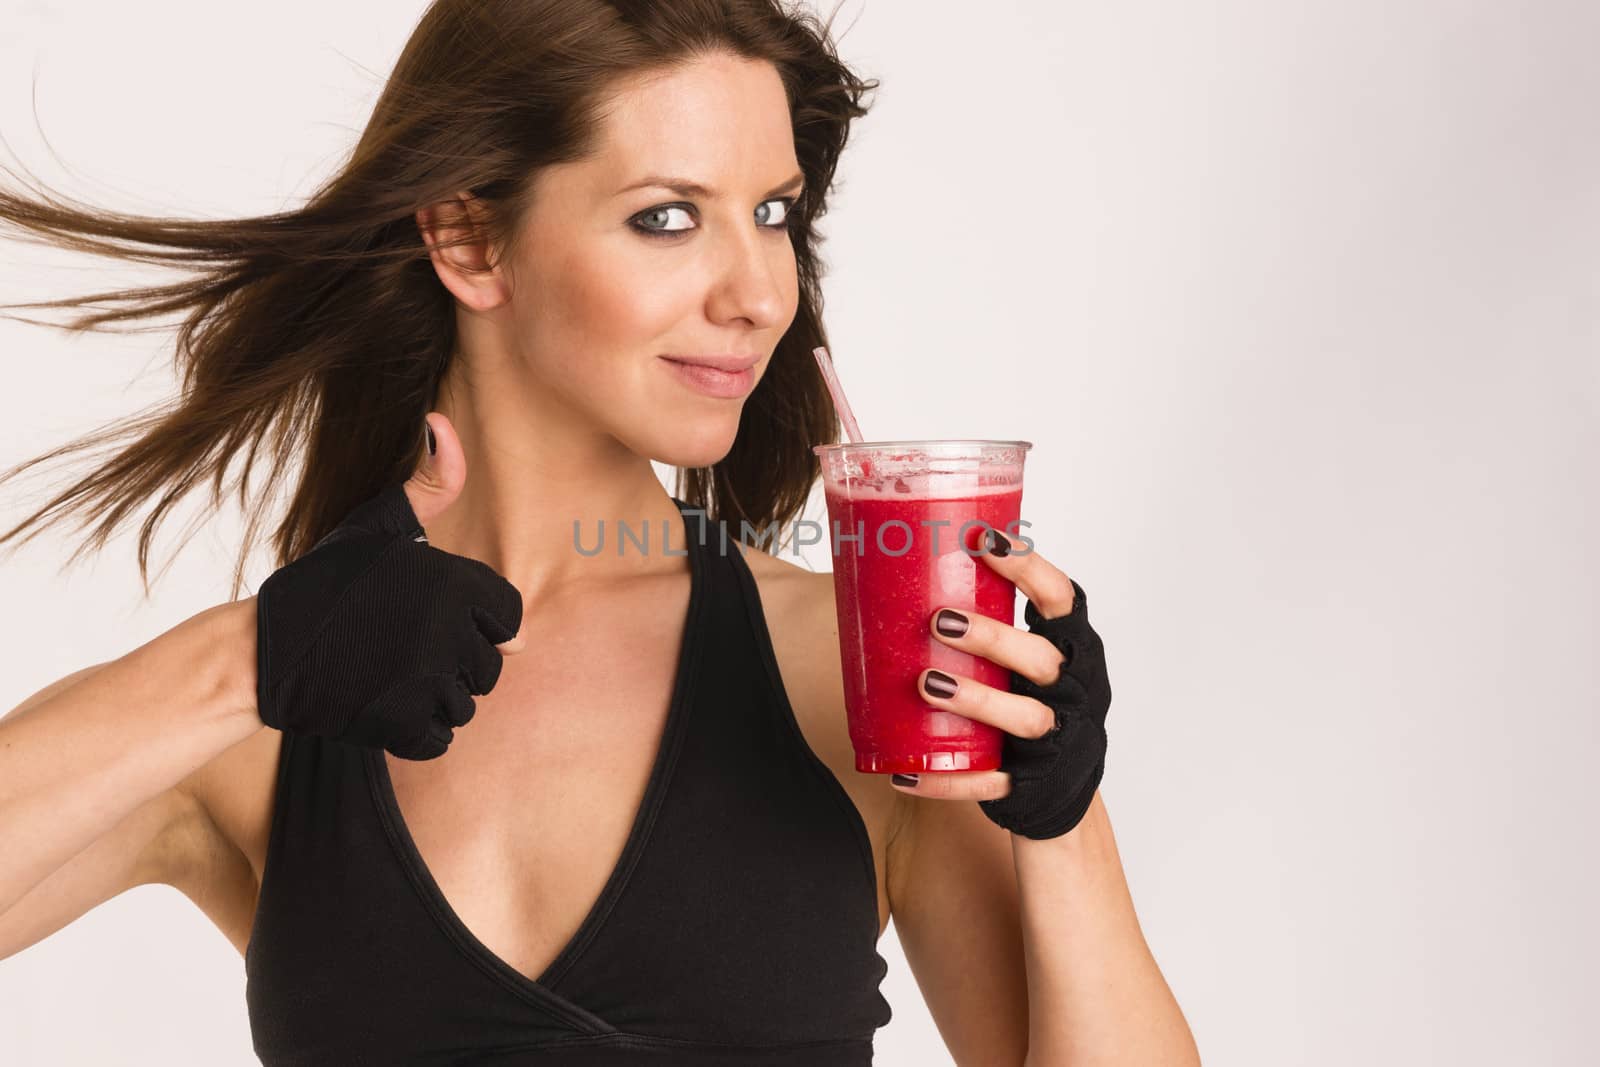 Attractive Athletic Female Shows Thumbs up Sign Holding Refreshing Blended Food Fruit Smothie Drink